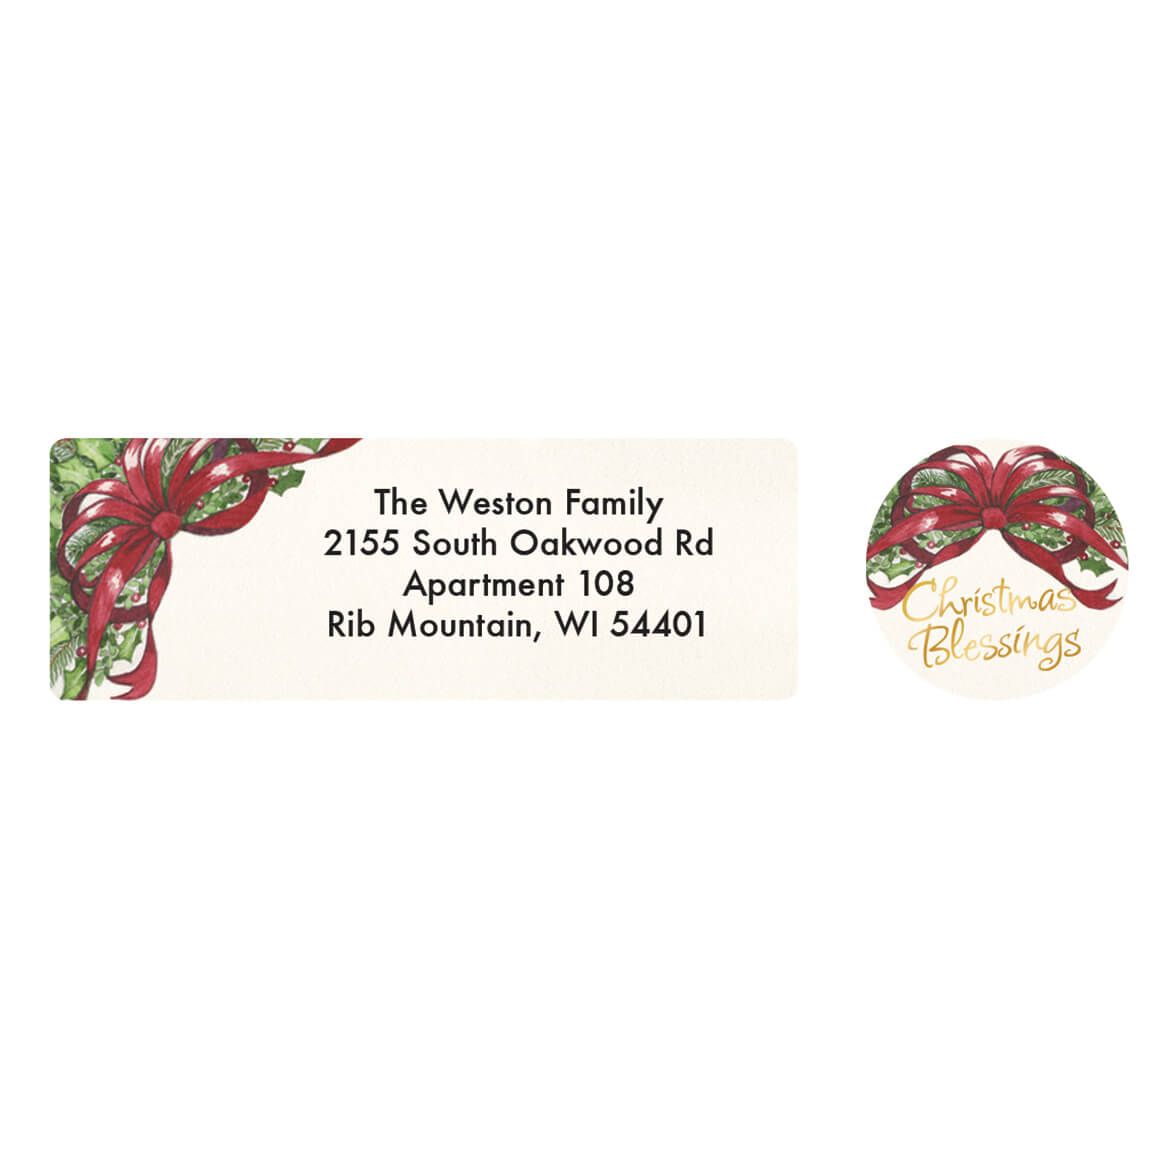 Personalized Christmas Blessings Address Labels & Seals 20 + '-' + 364709